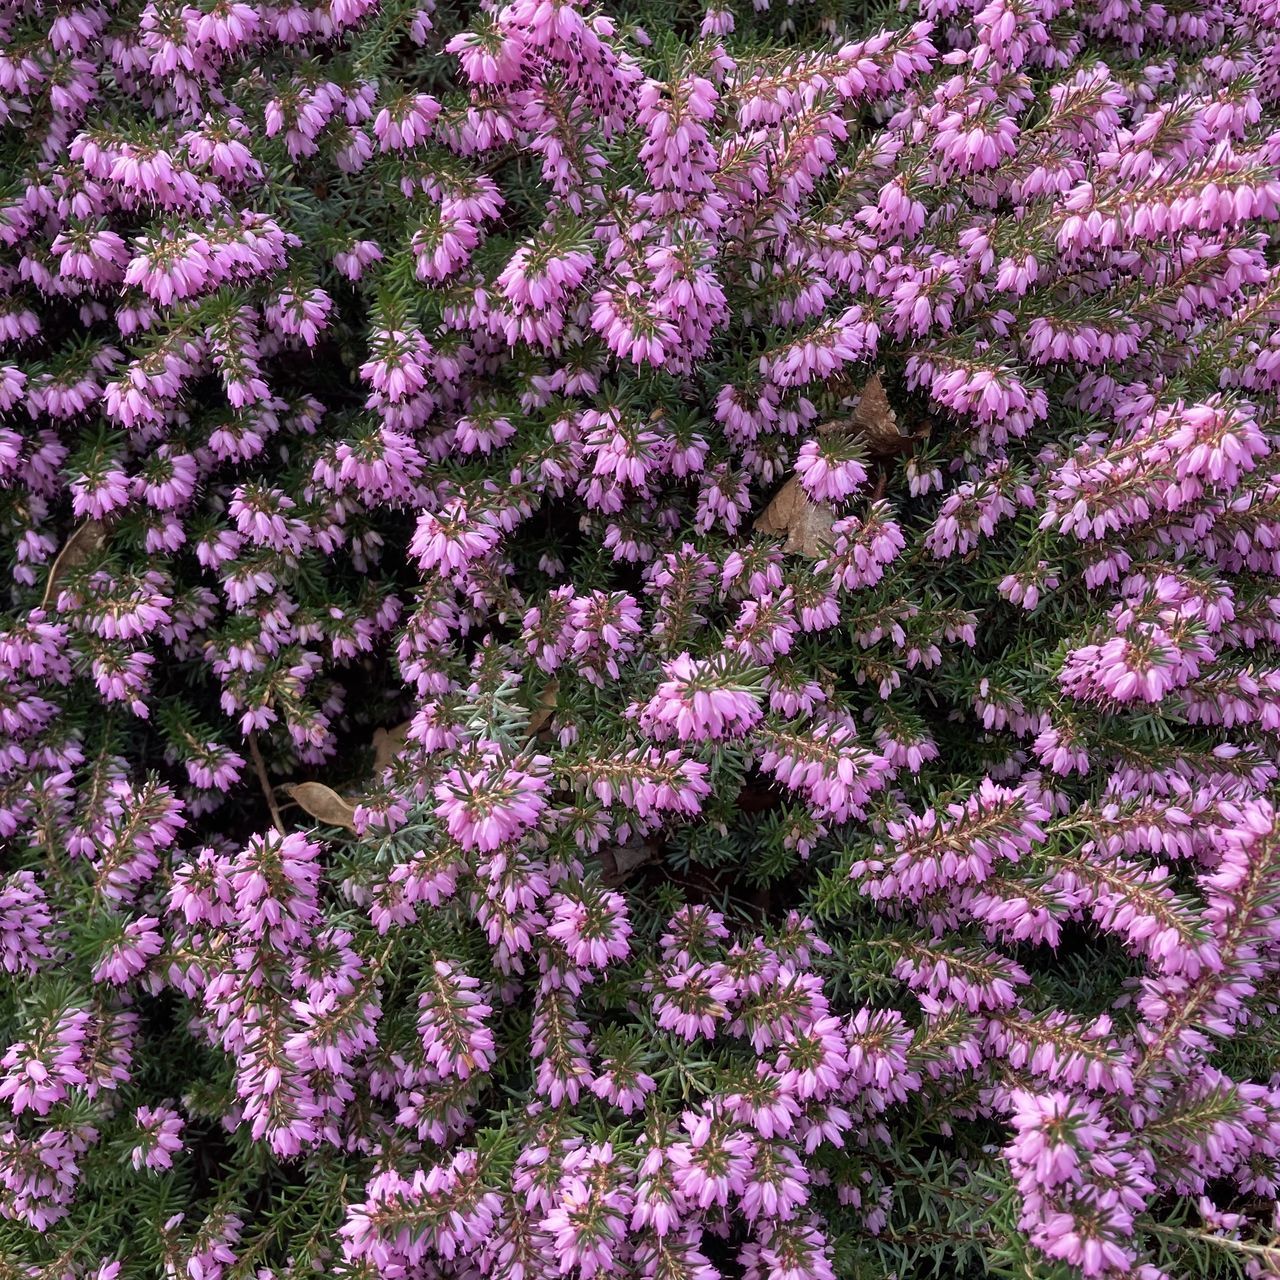 CLOSE-UP OF PINK FLOWERING PLANT